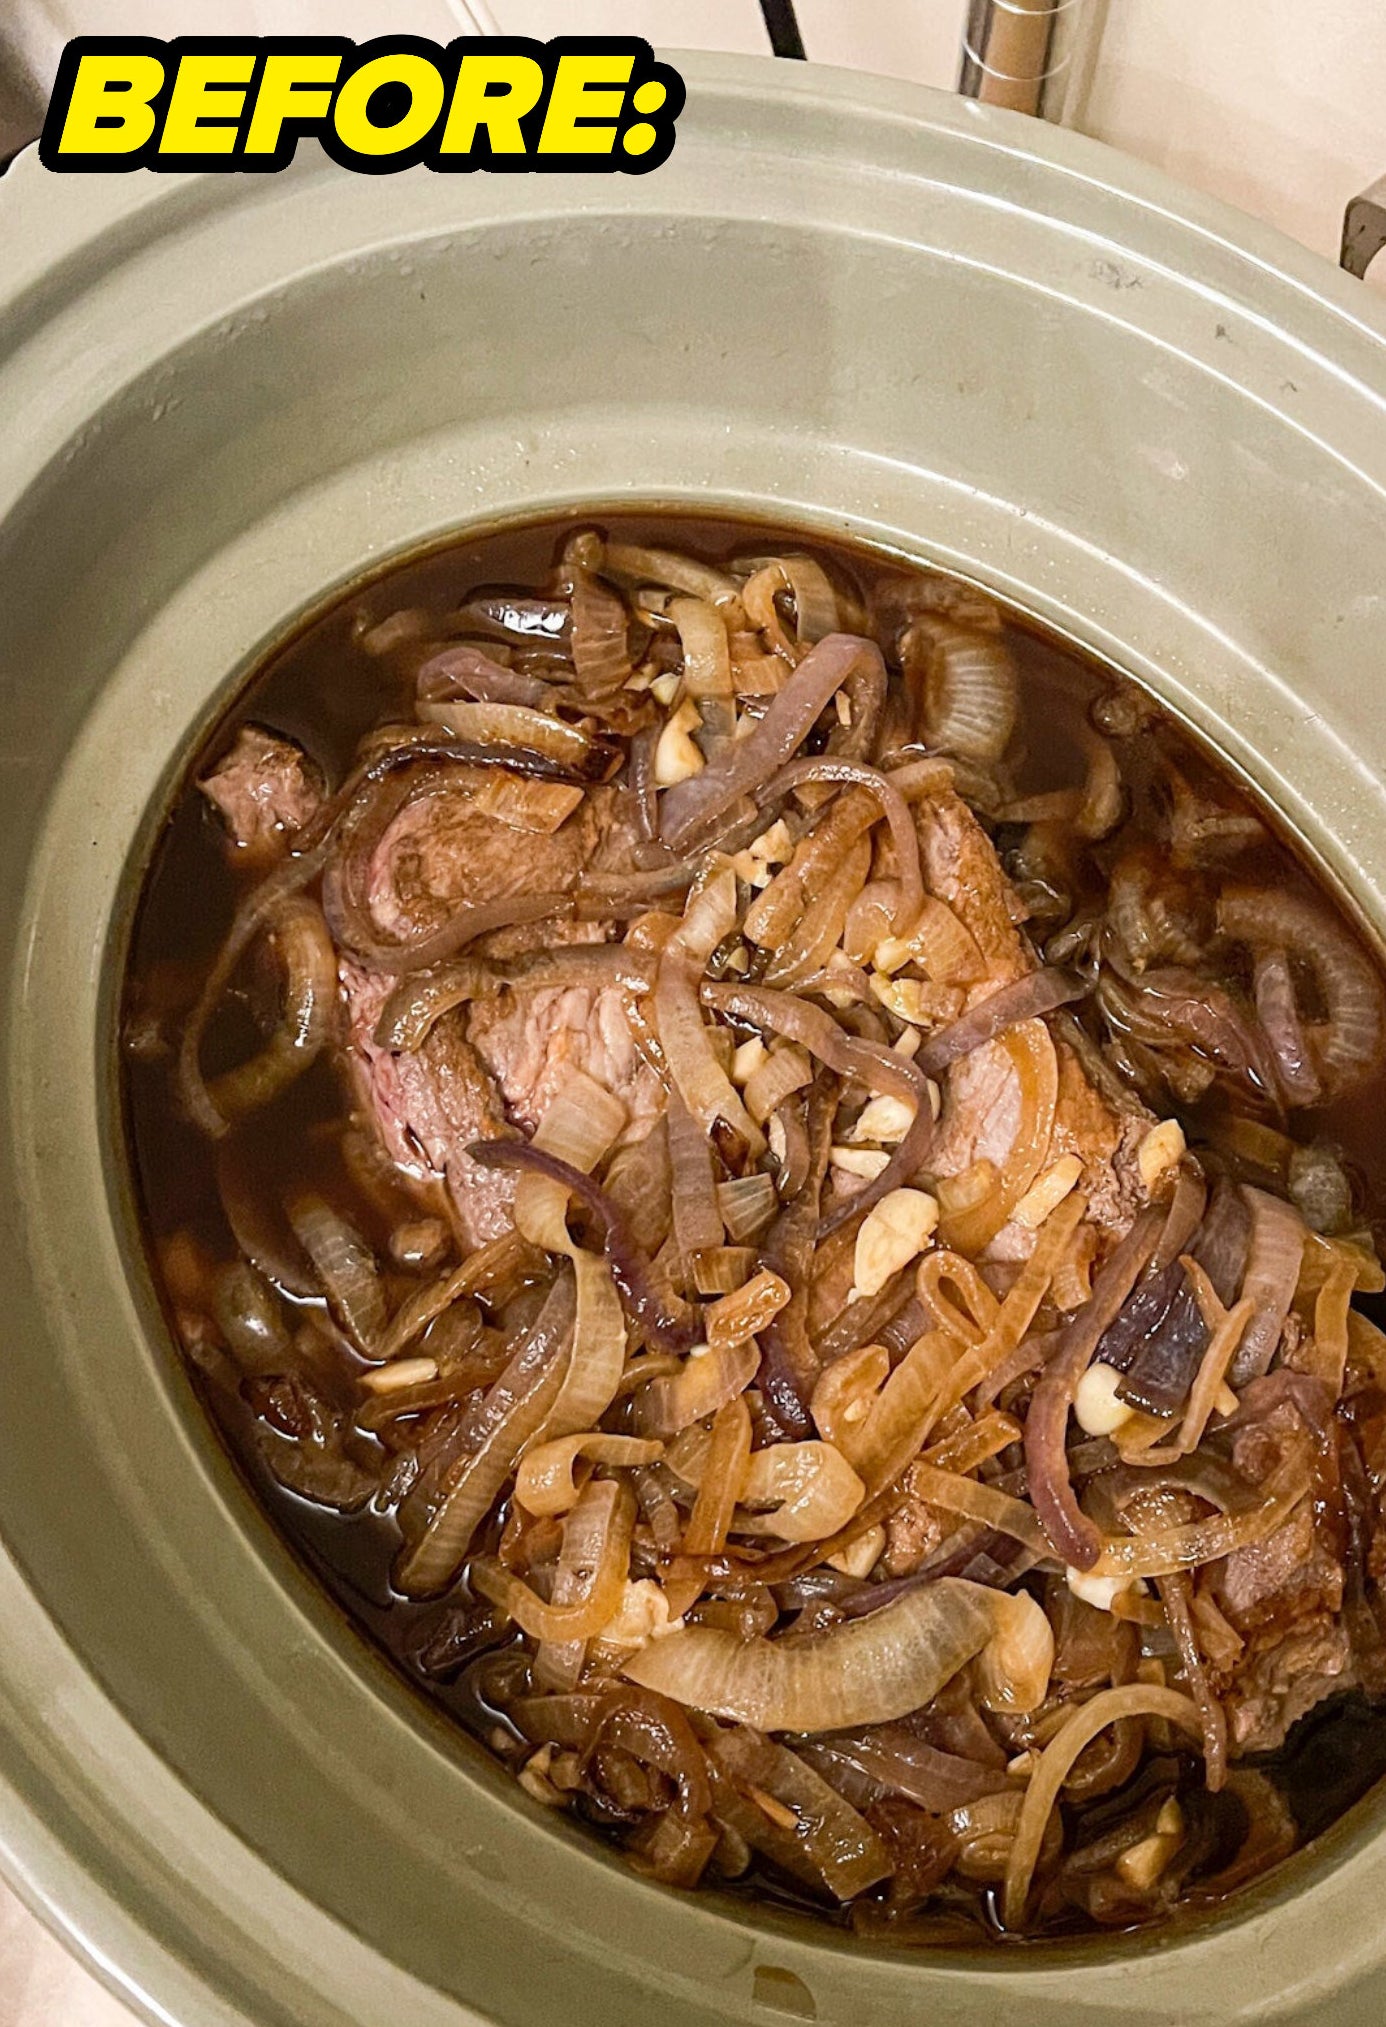 Before: onions on top of a brisket in the slow cooker